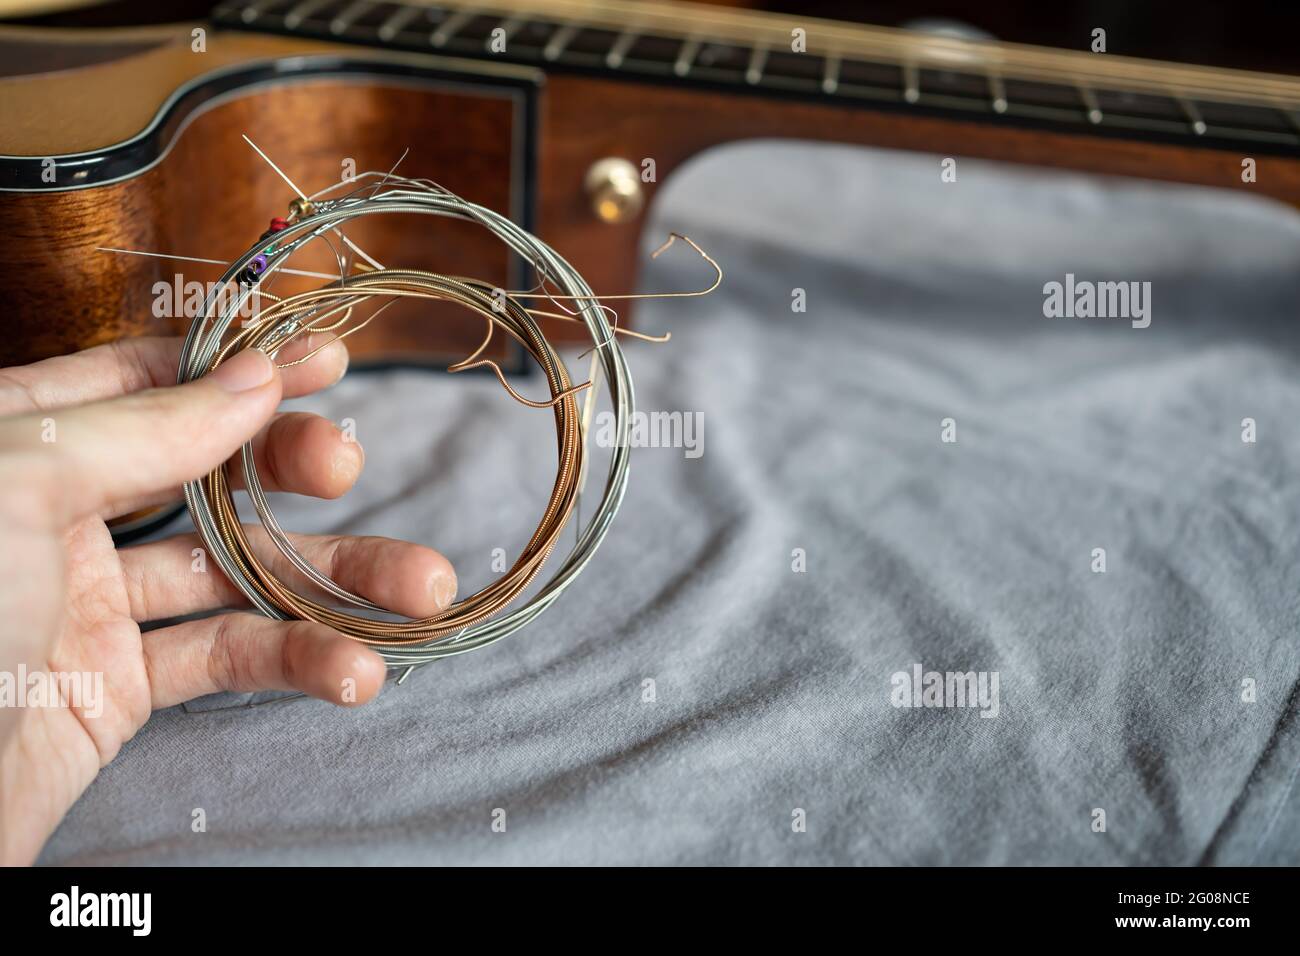 hand holding old steel guitar strings Stock Photo